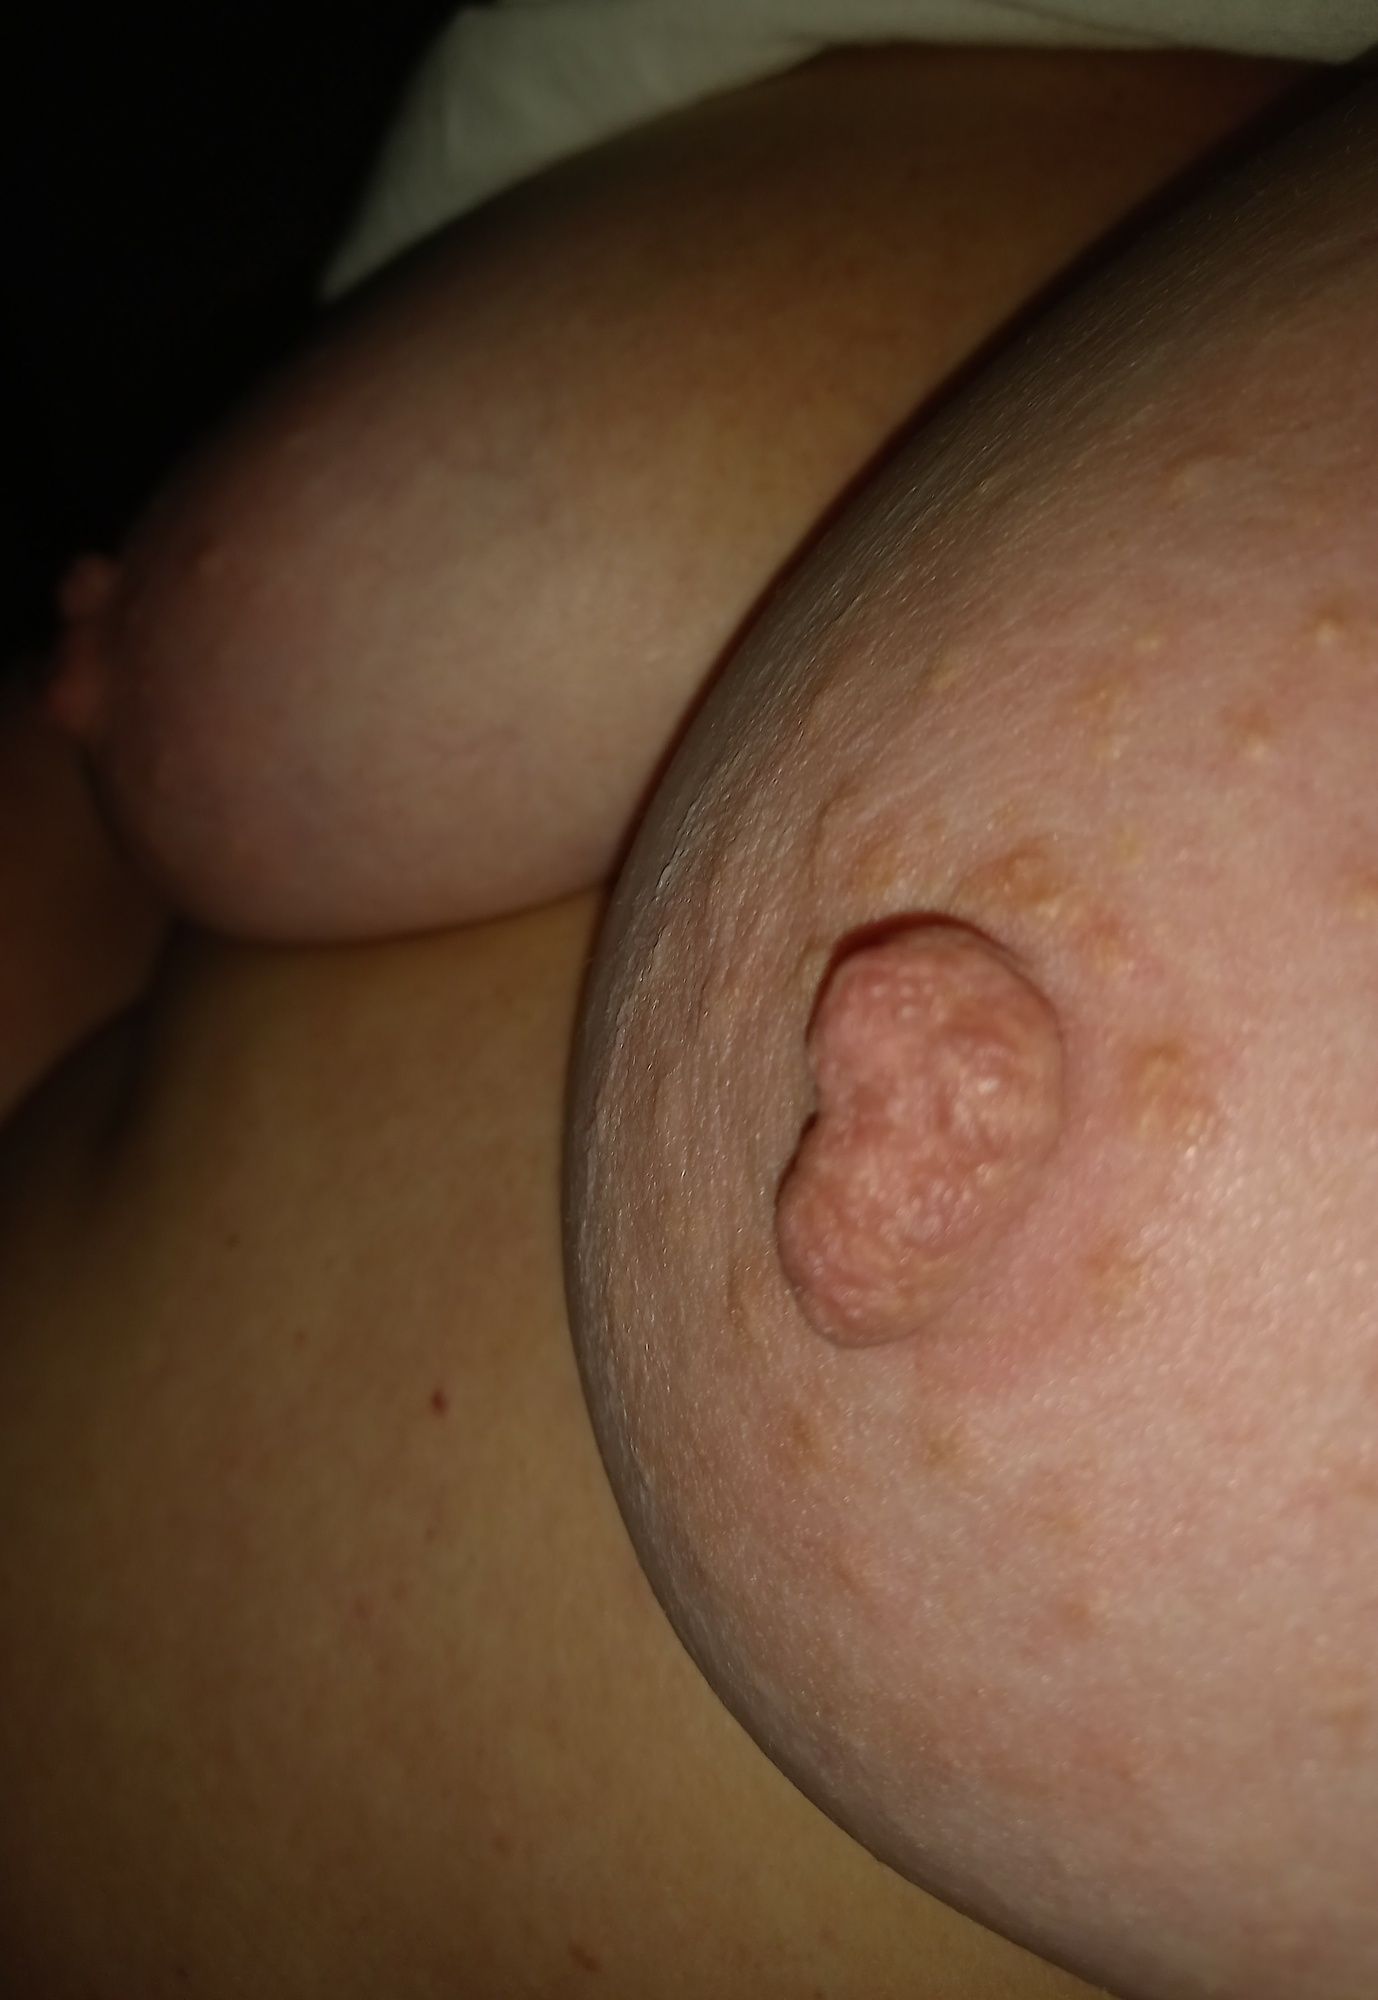 How about my old boobs...?